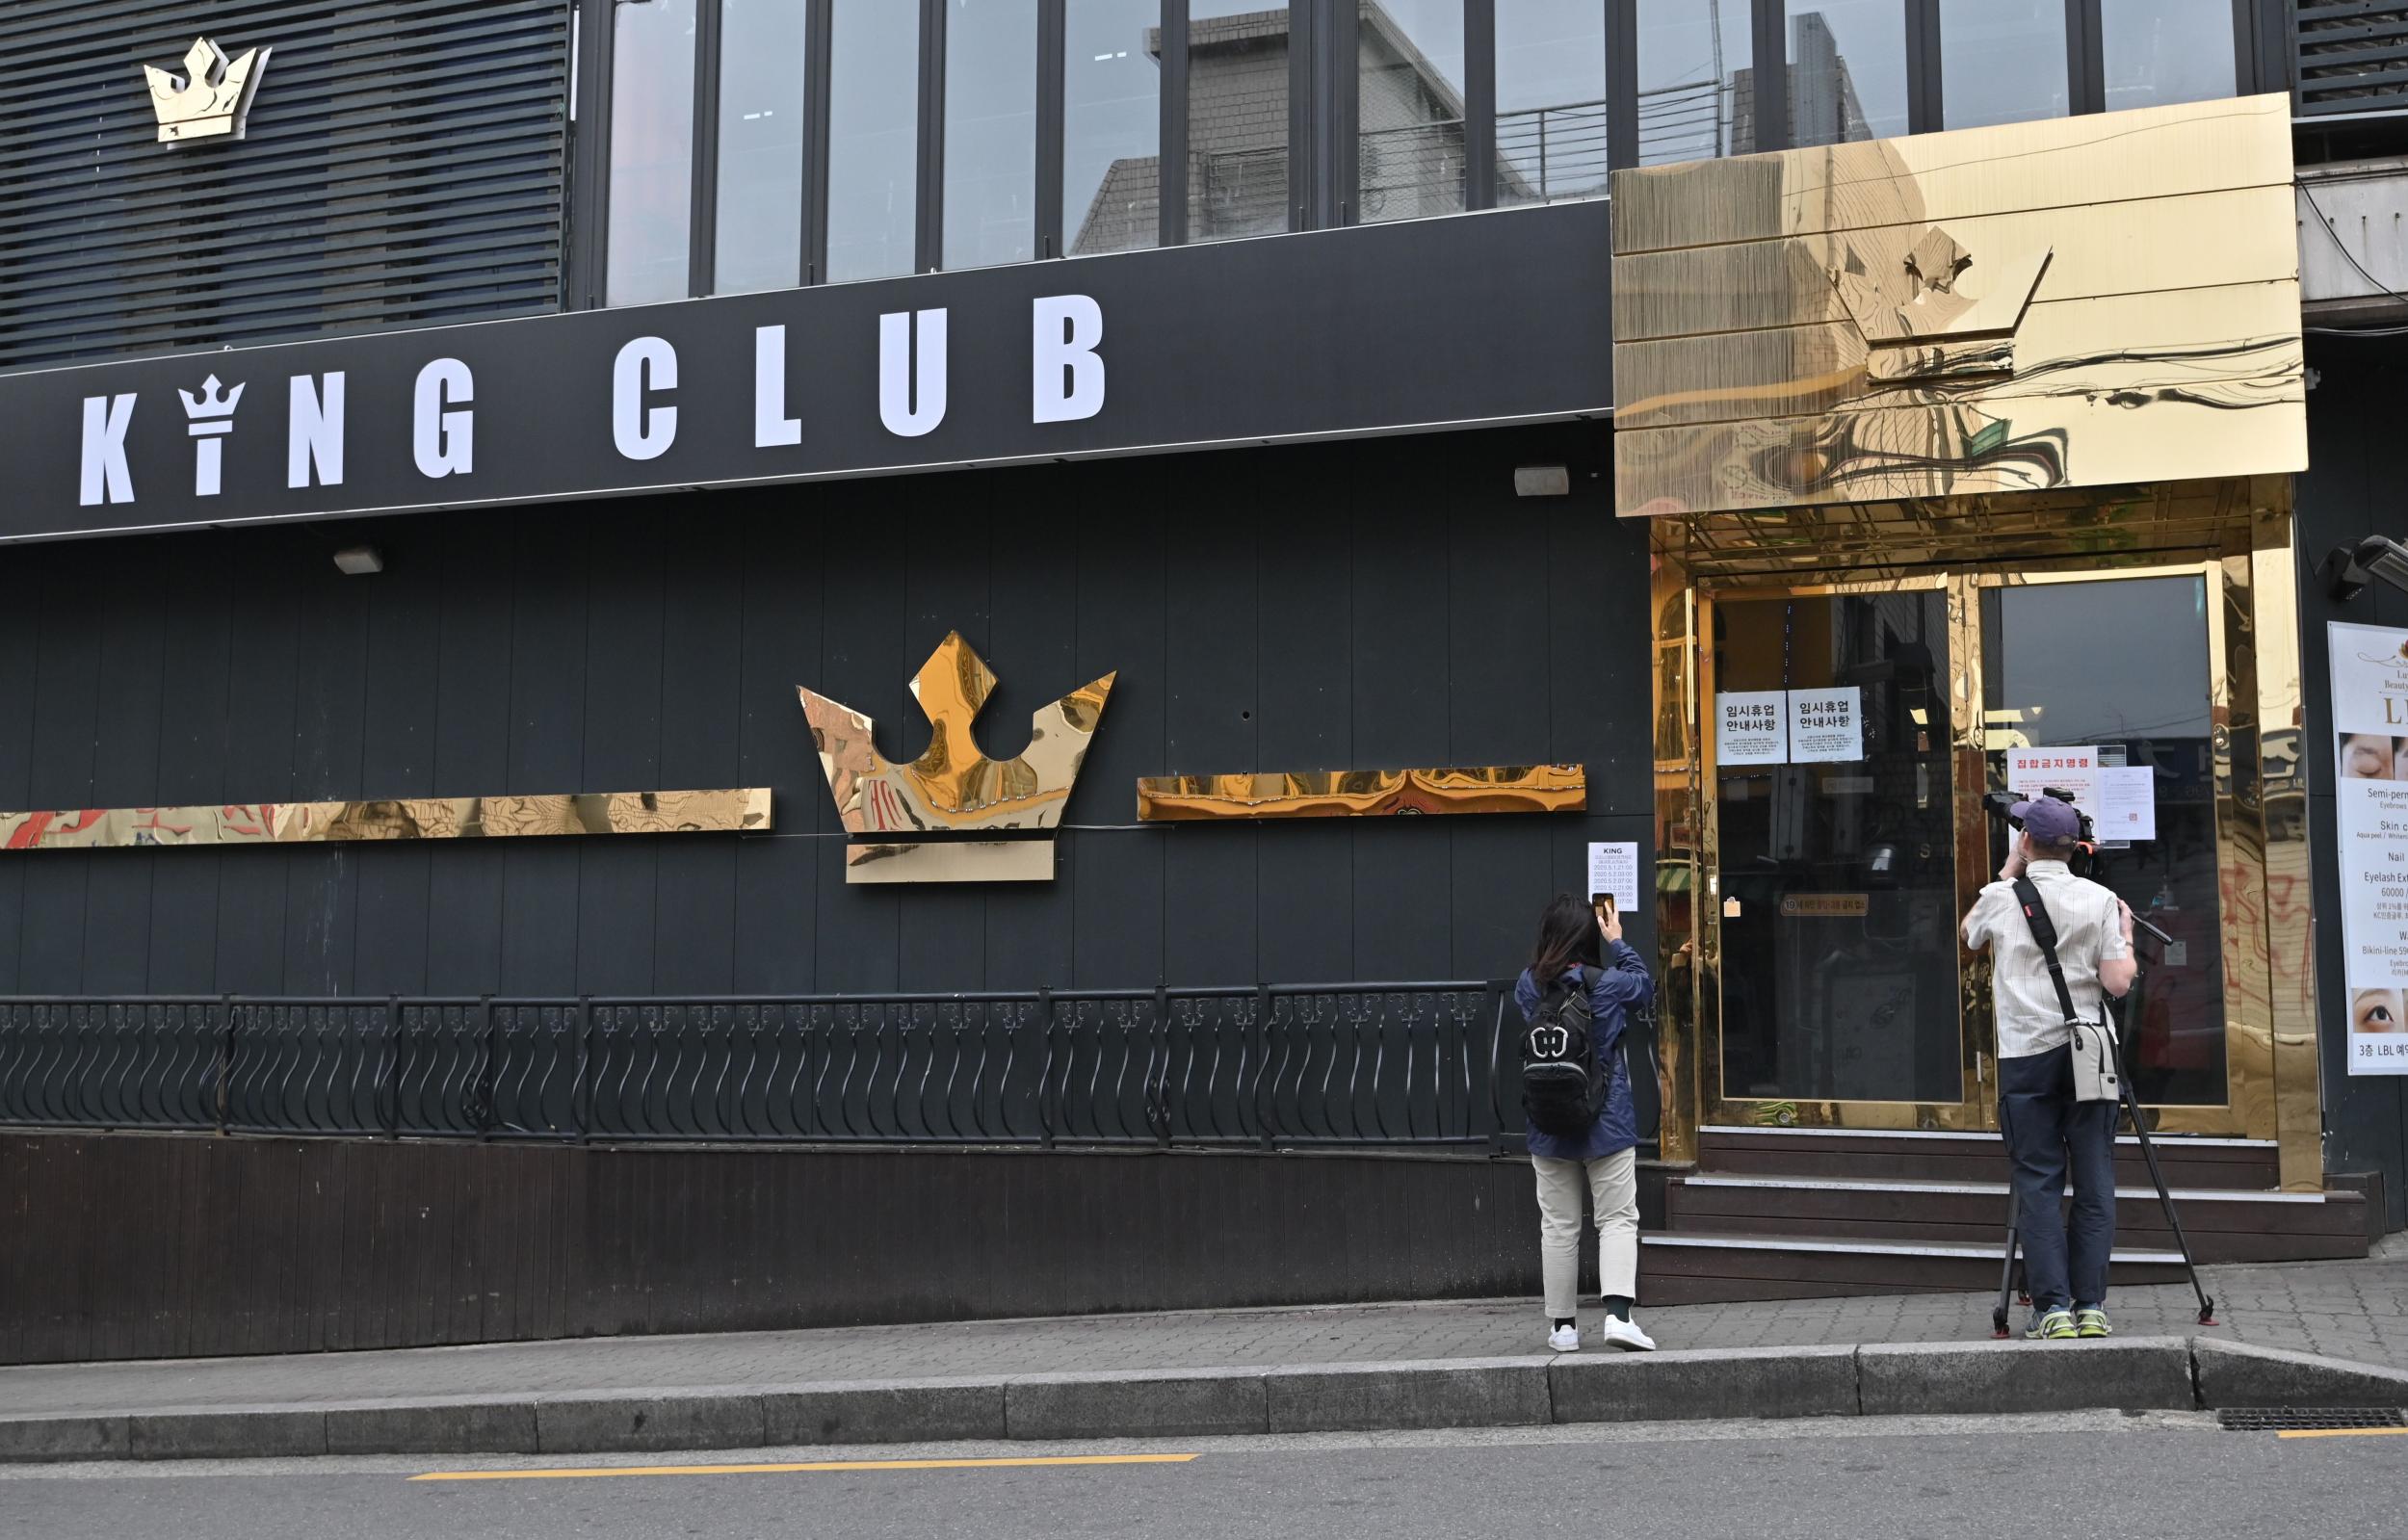 The confirmed Covid-19 patient visited the King Club amongst other spots popular with gay men